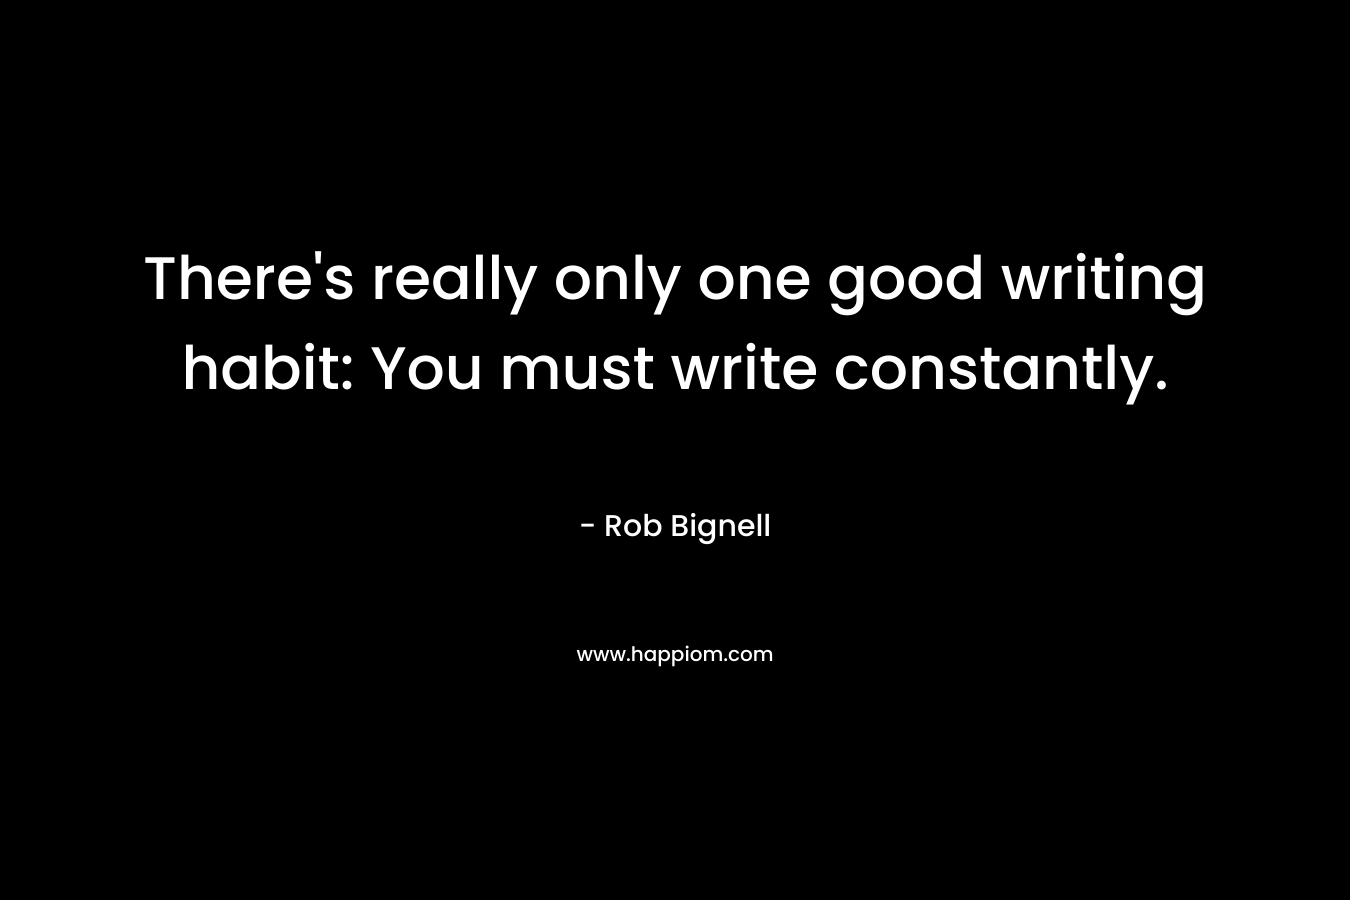 There's really only one good writing habit: You must write constantly.